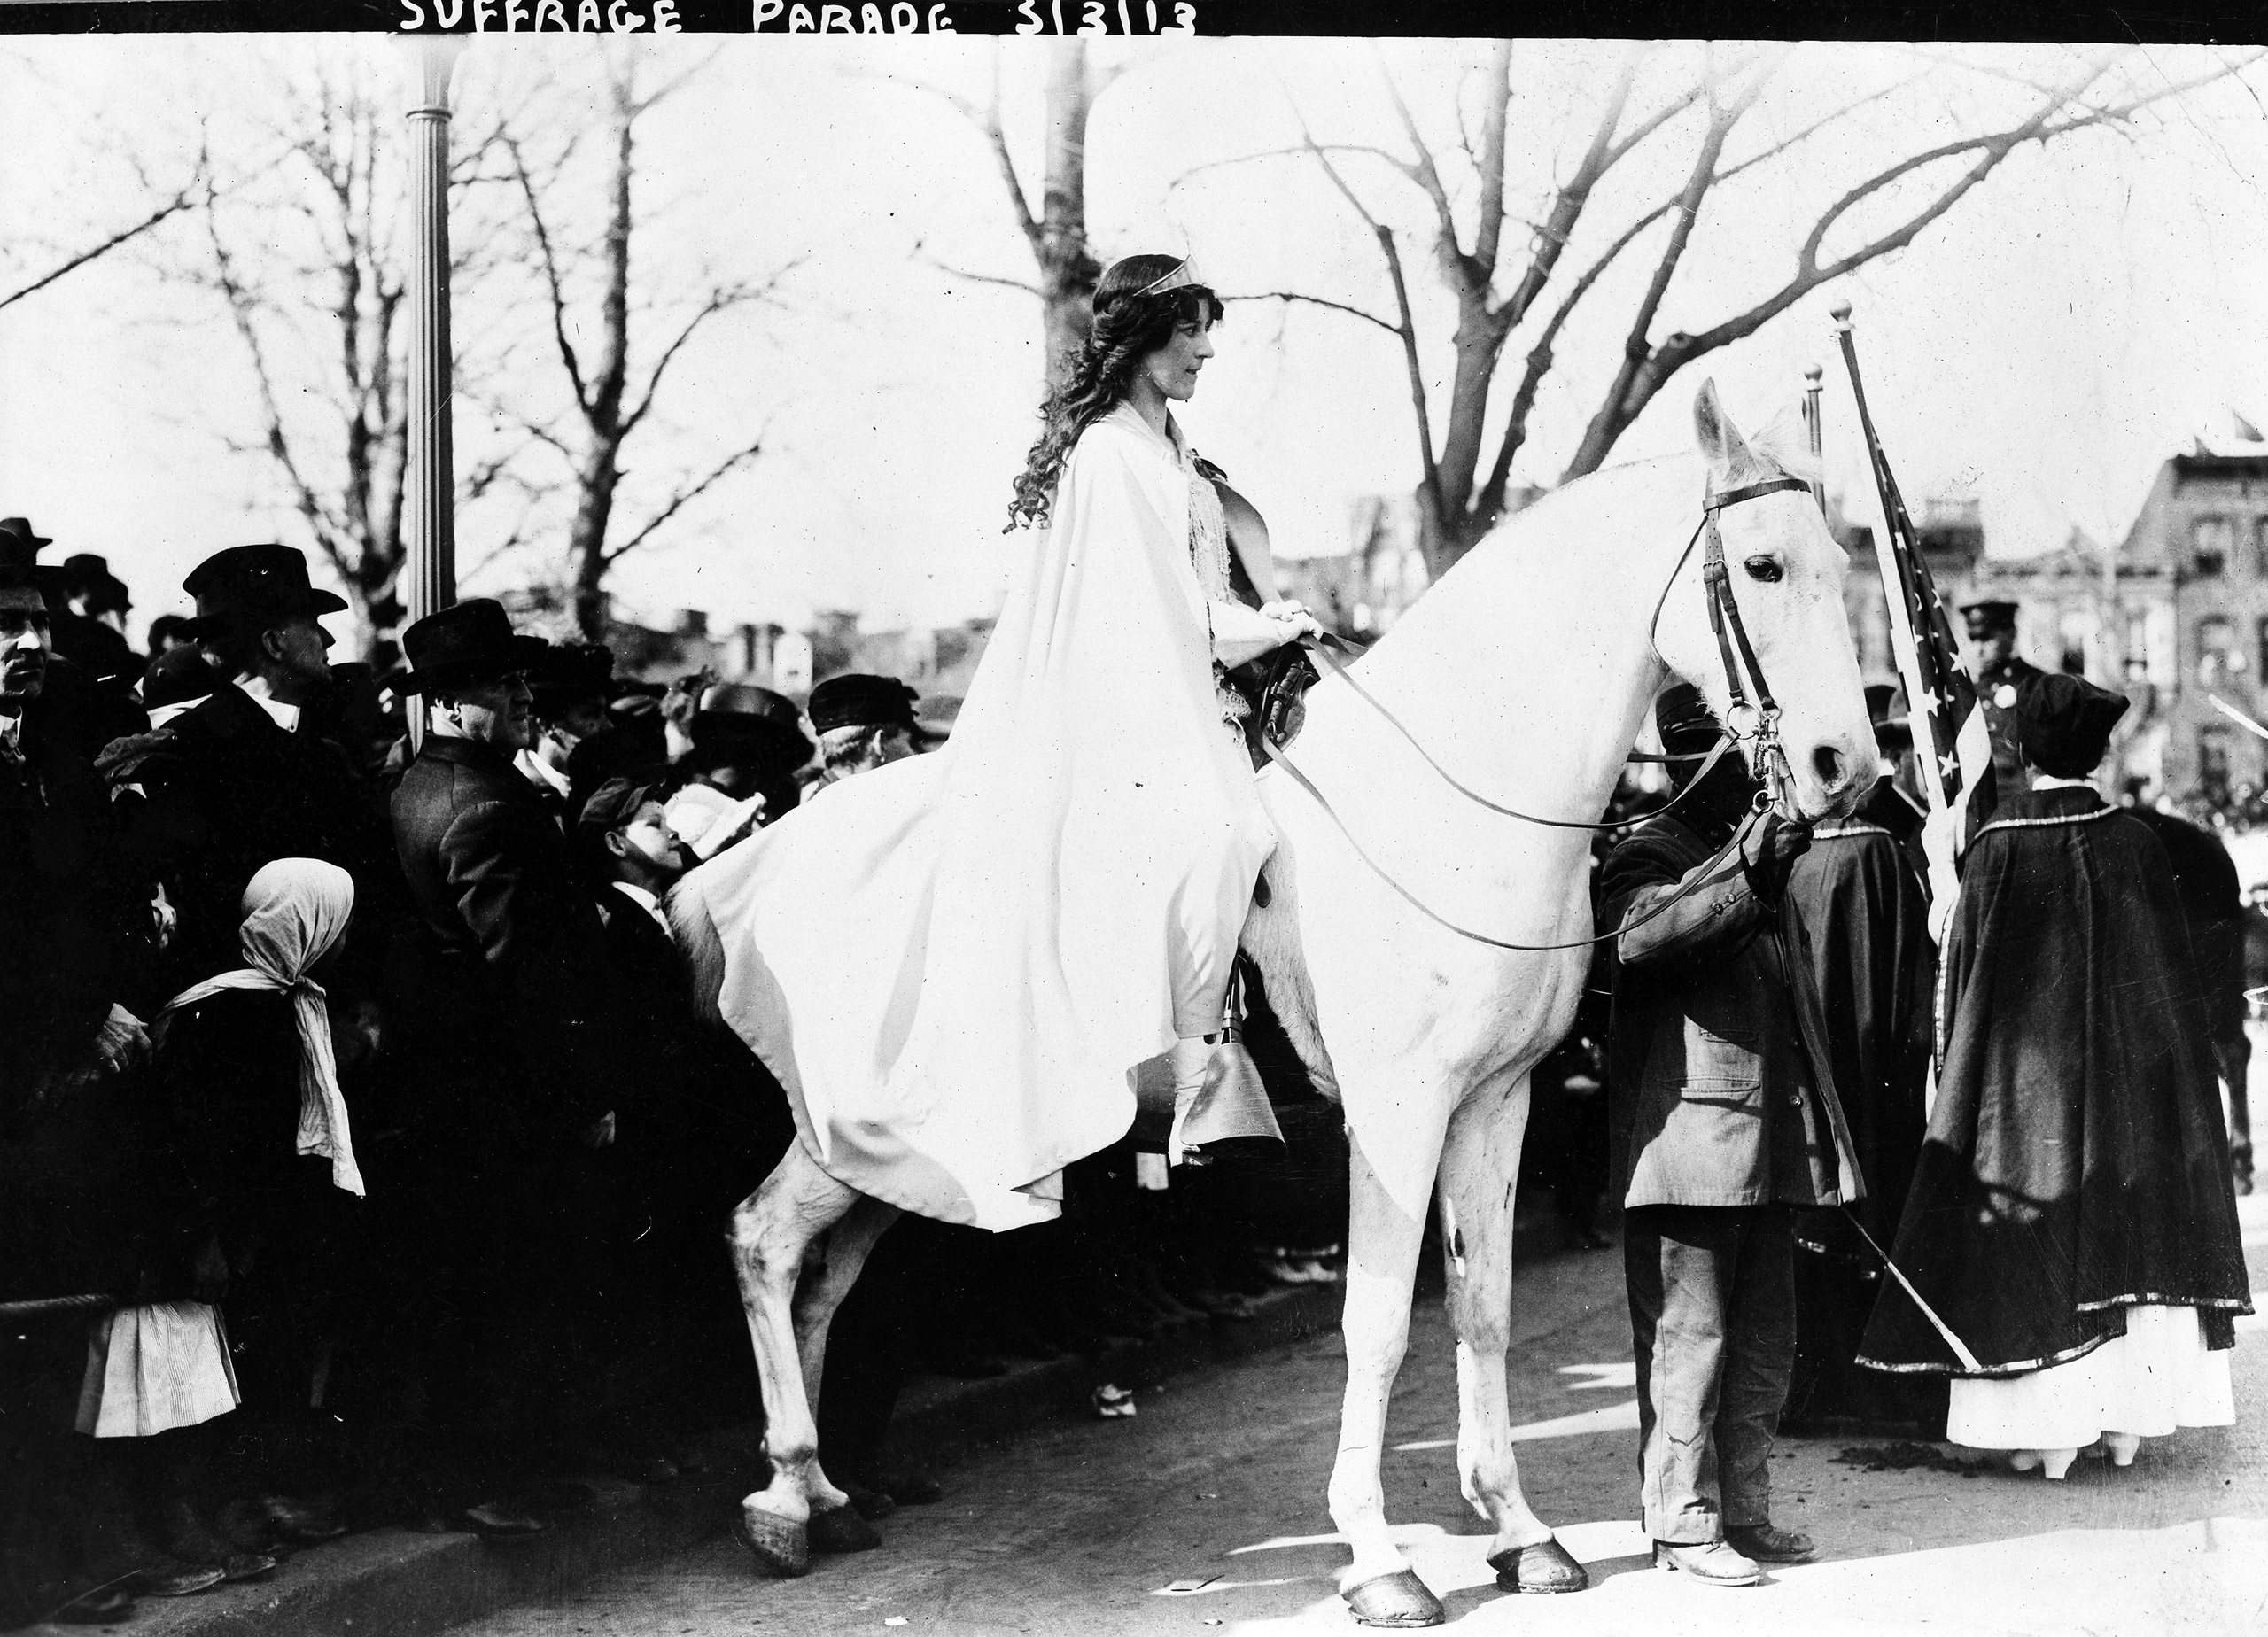 Inez Milholland Boissevain, wearing white cape, seated on white horse at the National American Woman Suffrage Association parade, March 3, 1913, Washington, D.C. (Library of Congress)